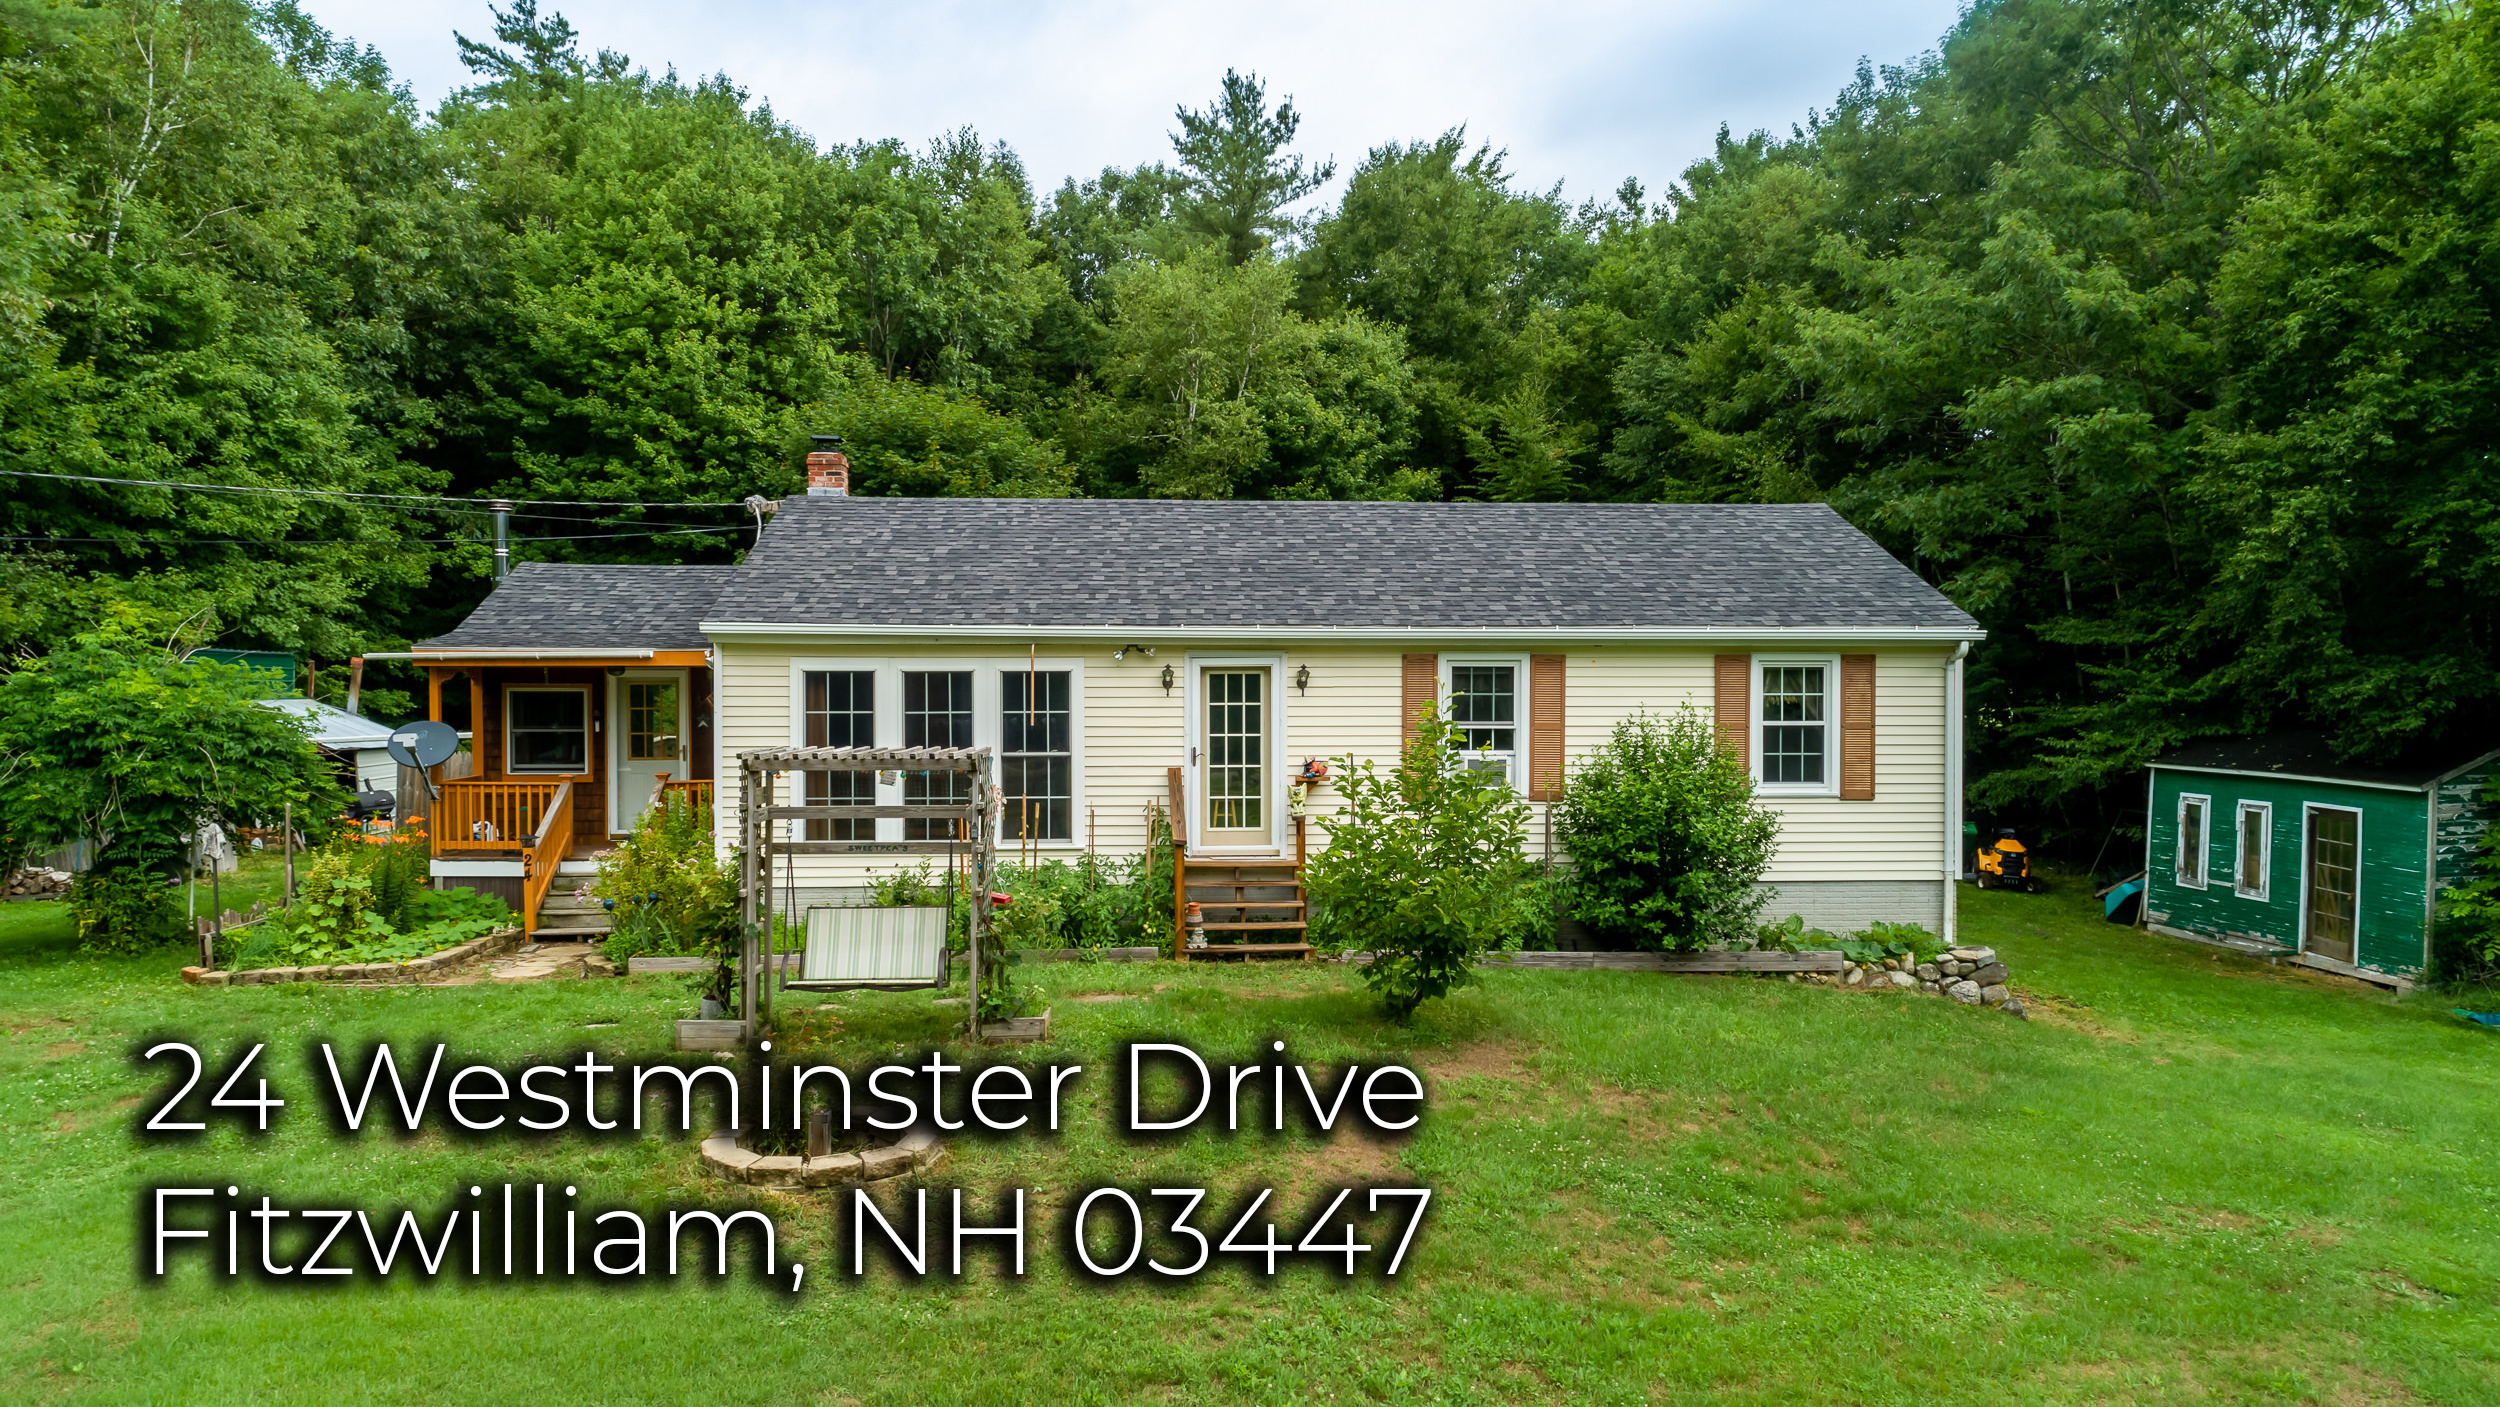 24 Westminster Dr Fitzwilliam NH 03447